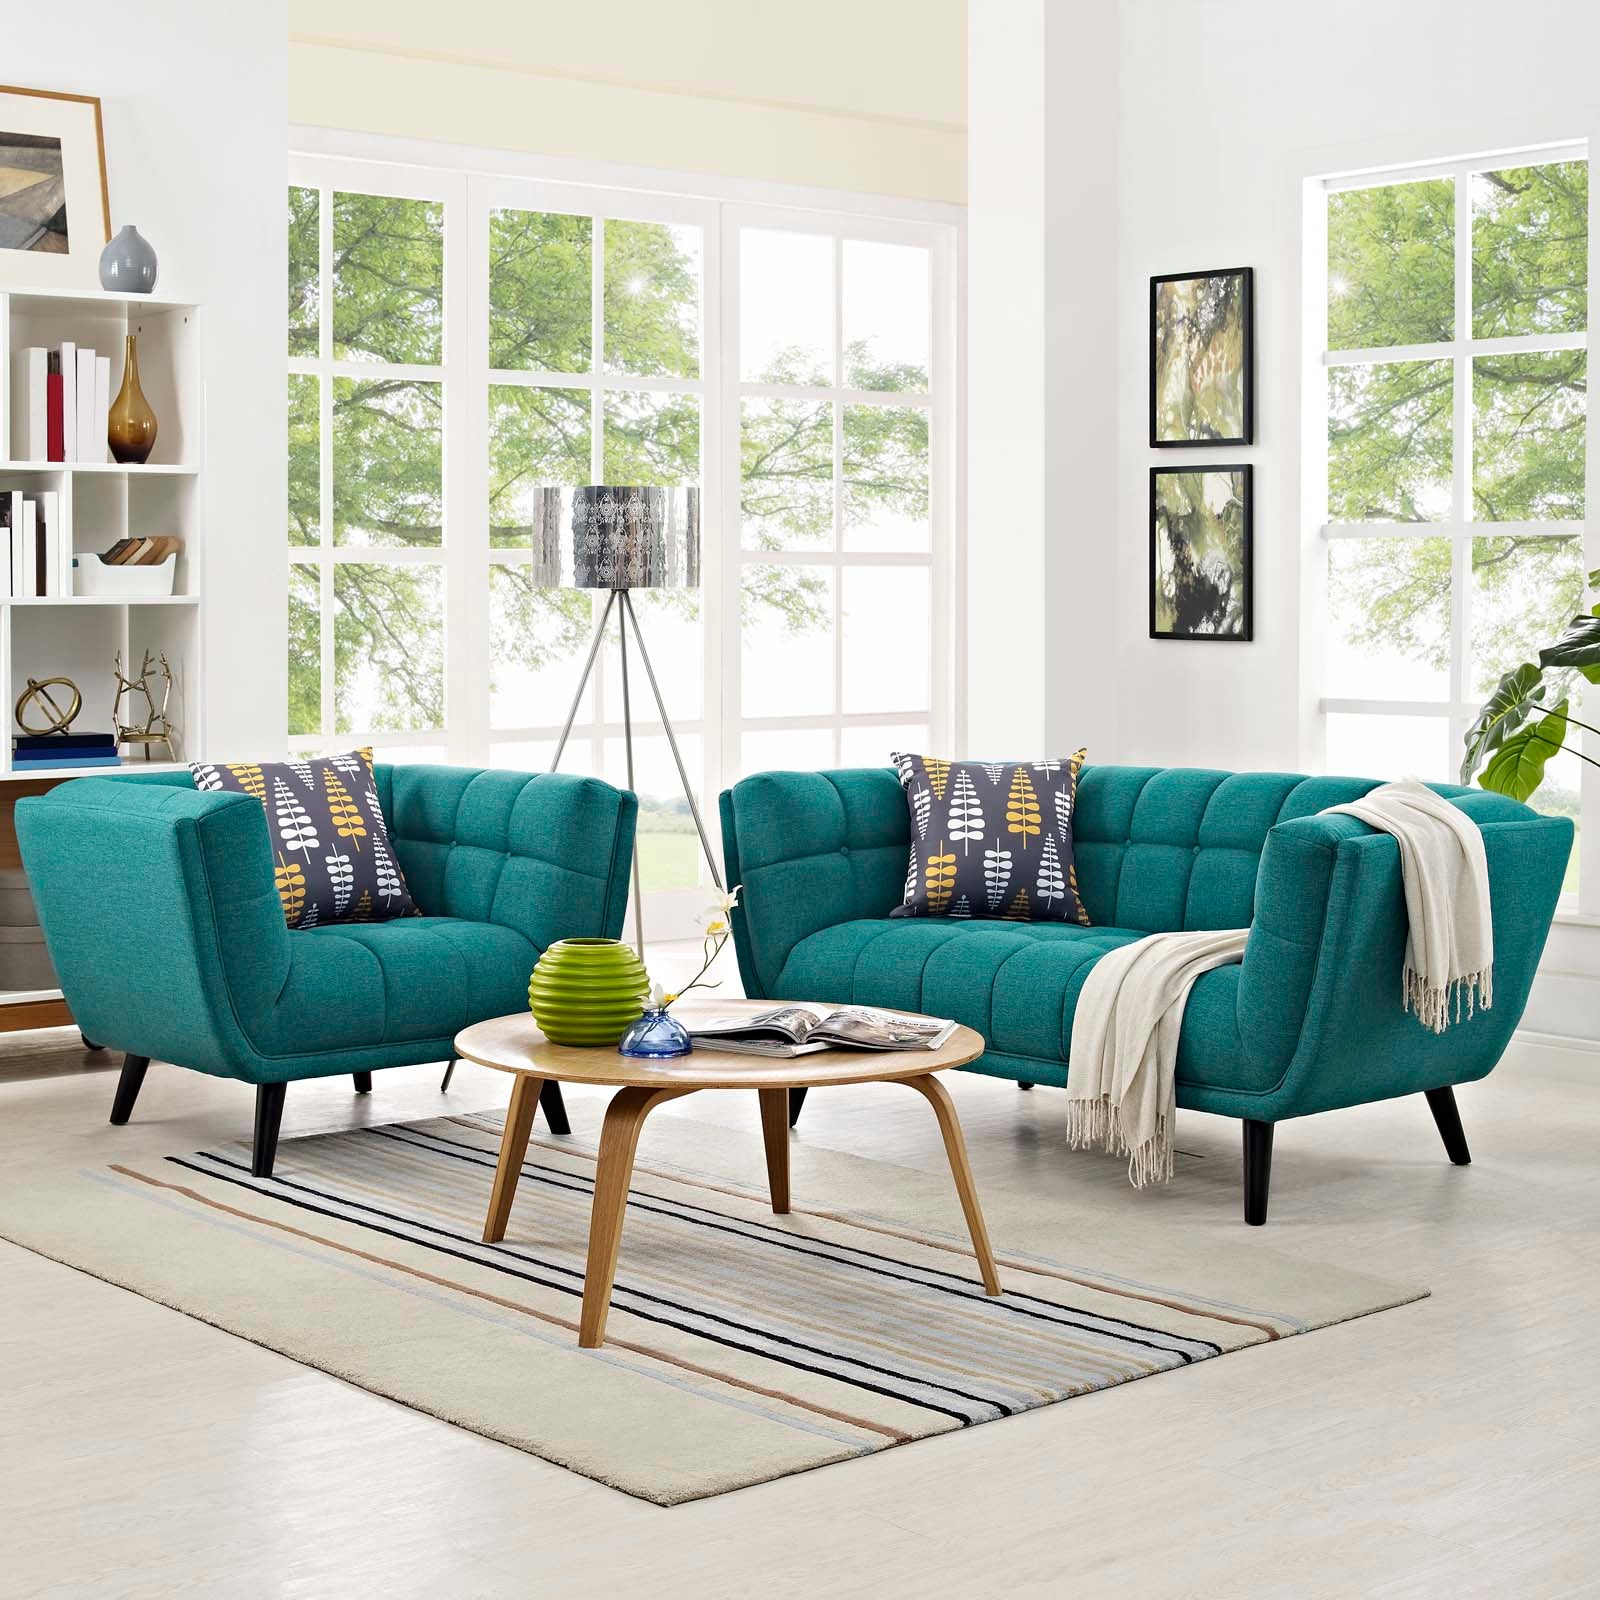 Modway Living Room Sets - Bestow 2 Piece Upholstered Fabric Loveseat and Armchair Set Teal